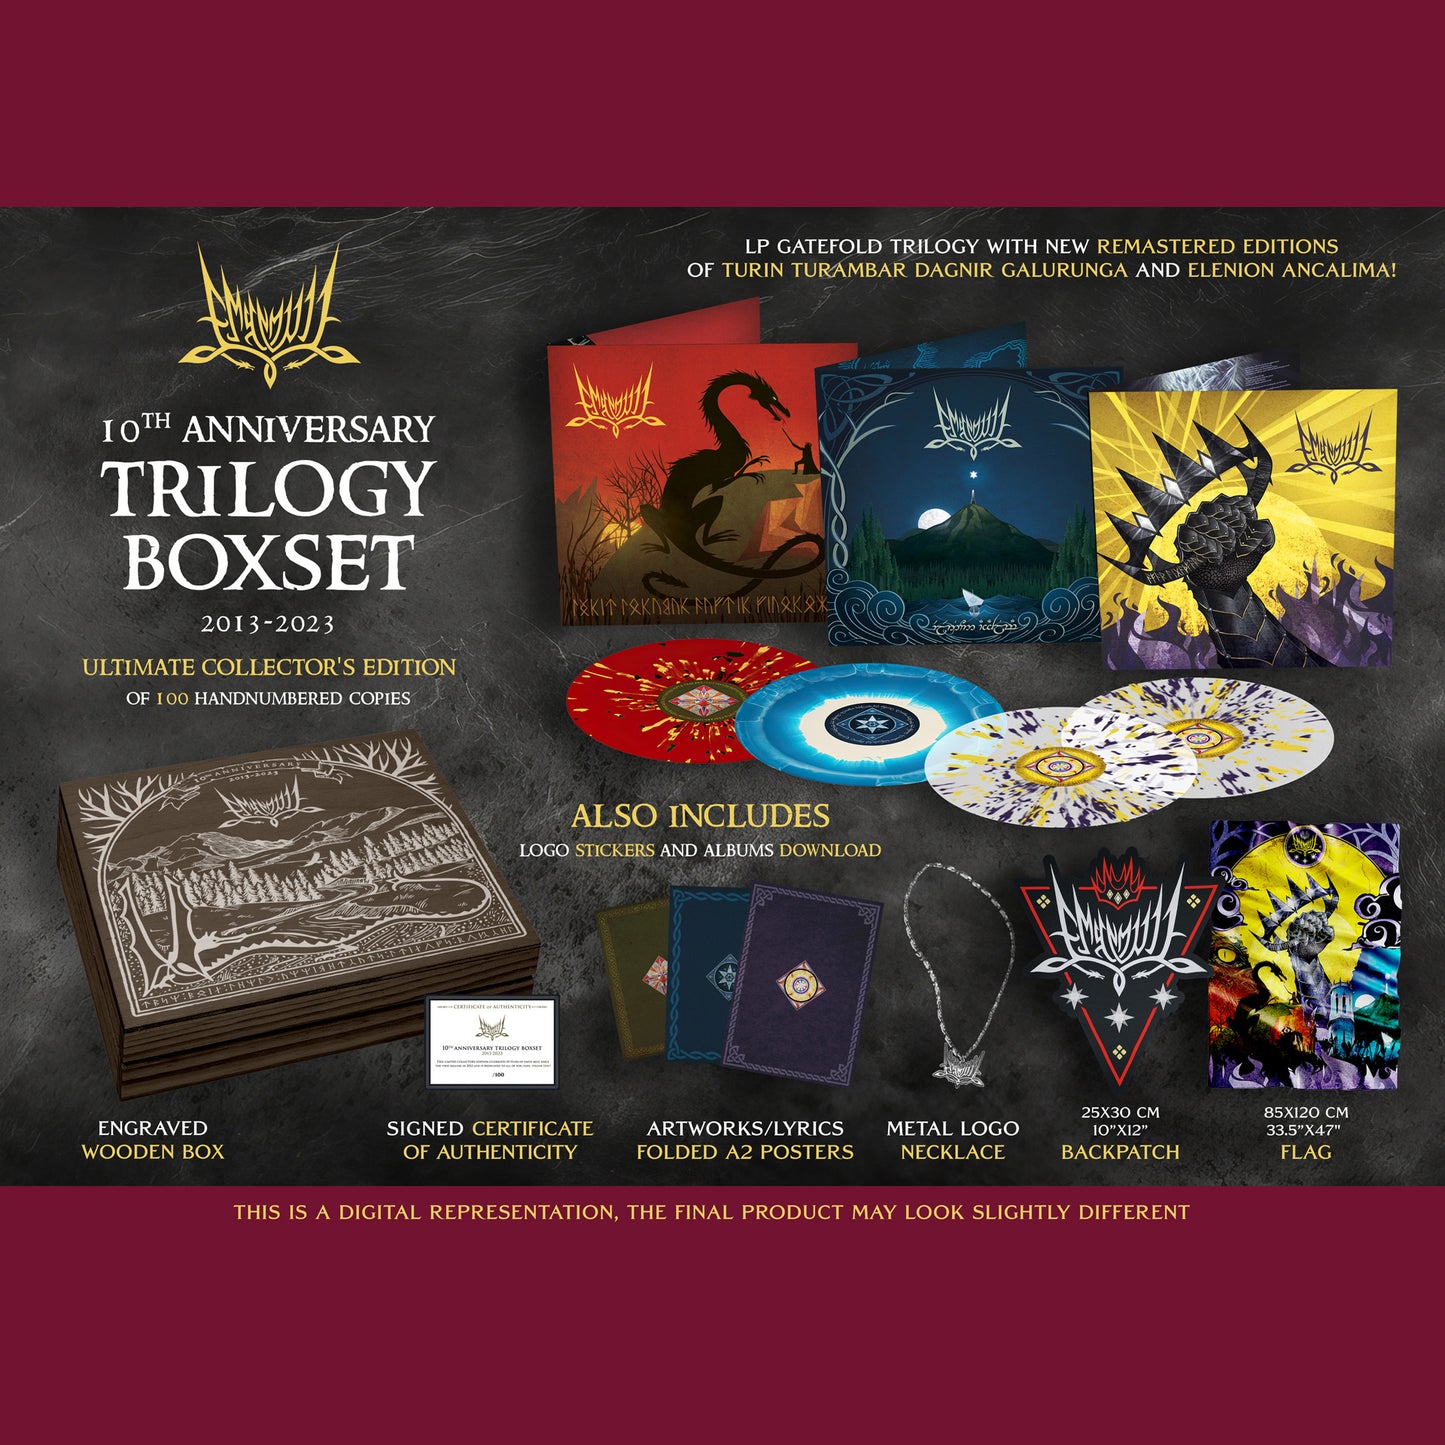 [SOLD OUT] EMYN MUIL "10th Anniversary Trilogy Boxset" Deluxe 4xLP Vinyl Wood Box Set (lim.100, pendant, back patch, flag, etc)